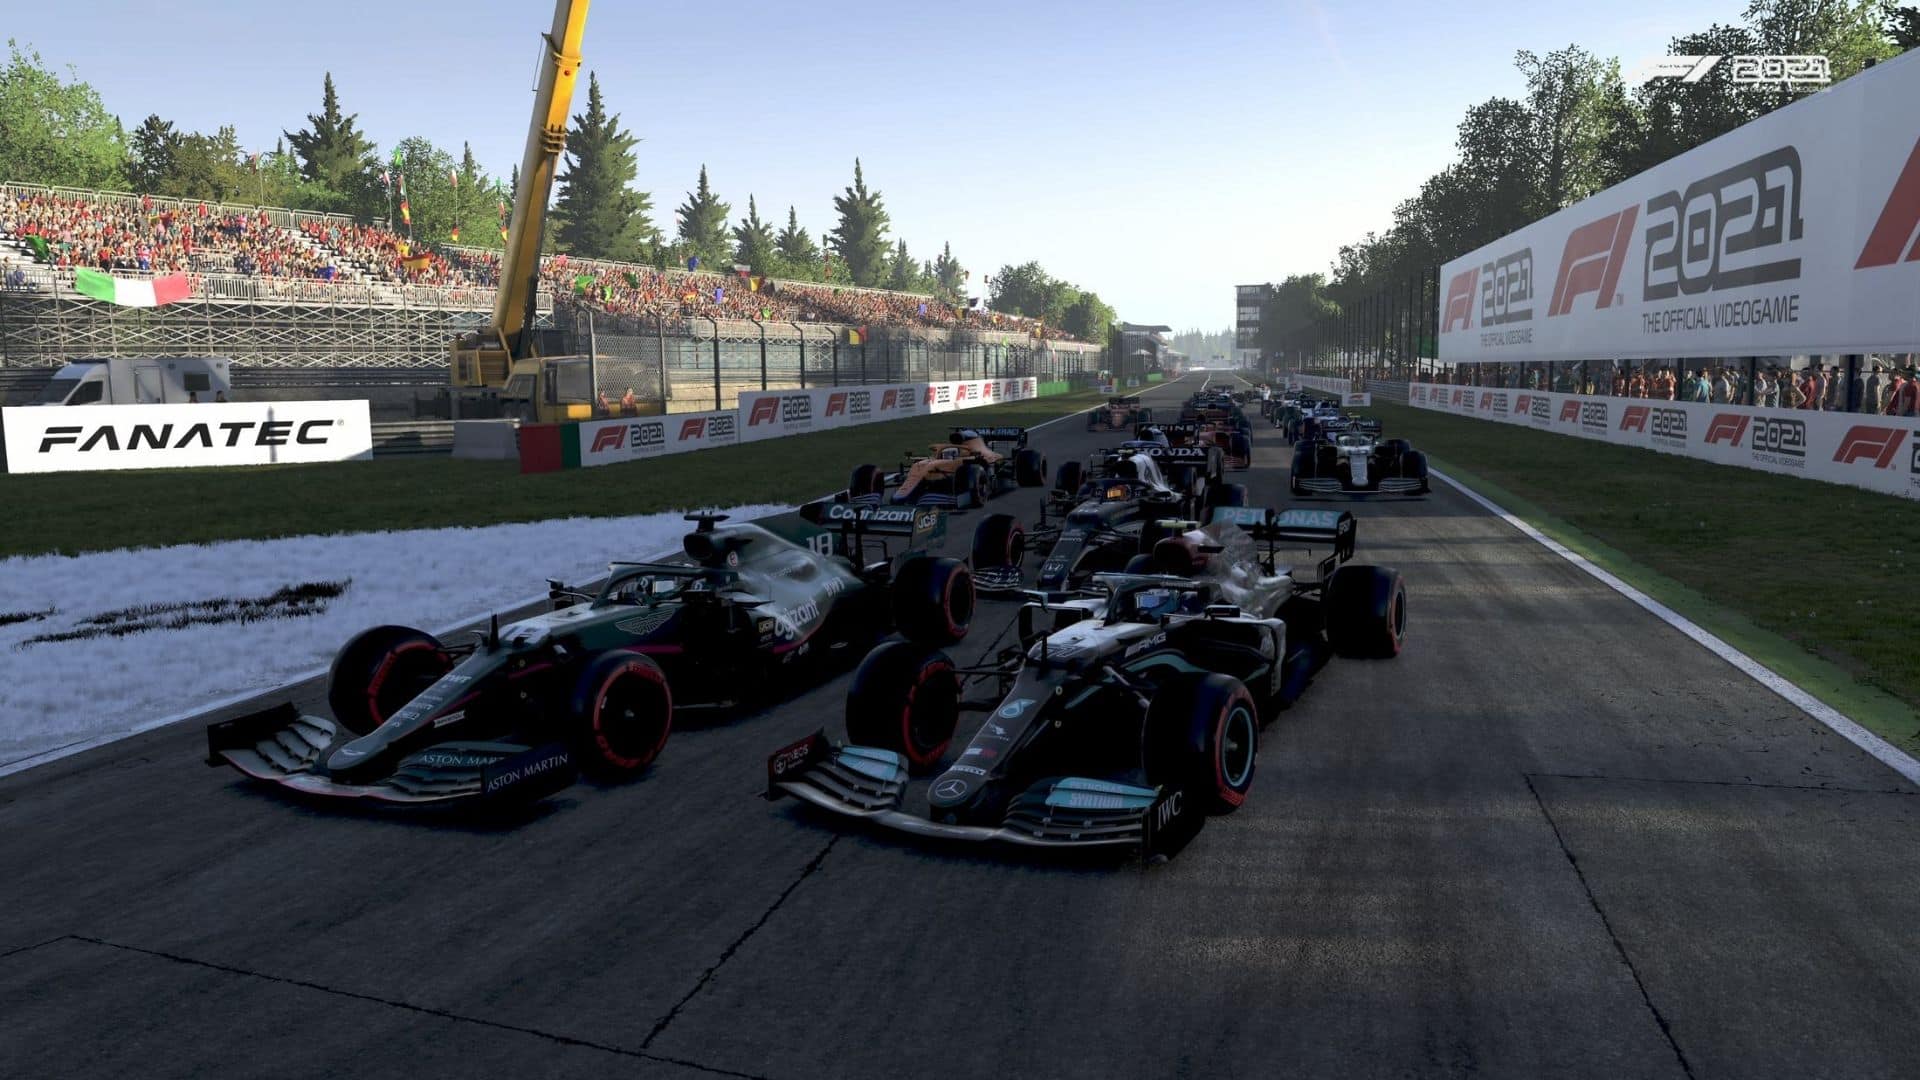 Alpha Tauri and Mercedes cars battling it out at Monza in f1 2021